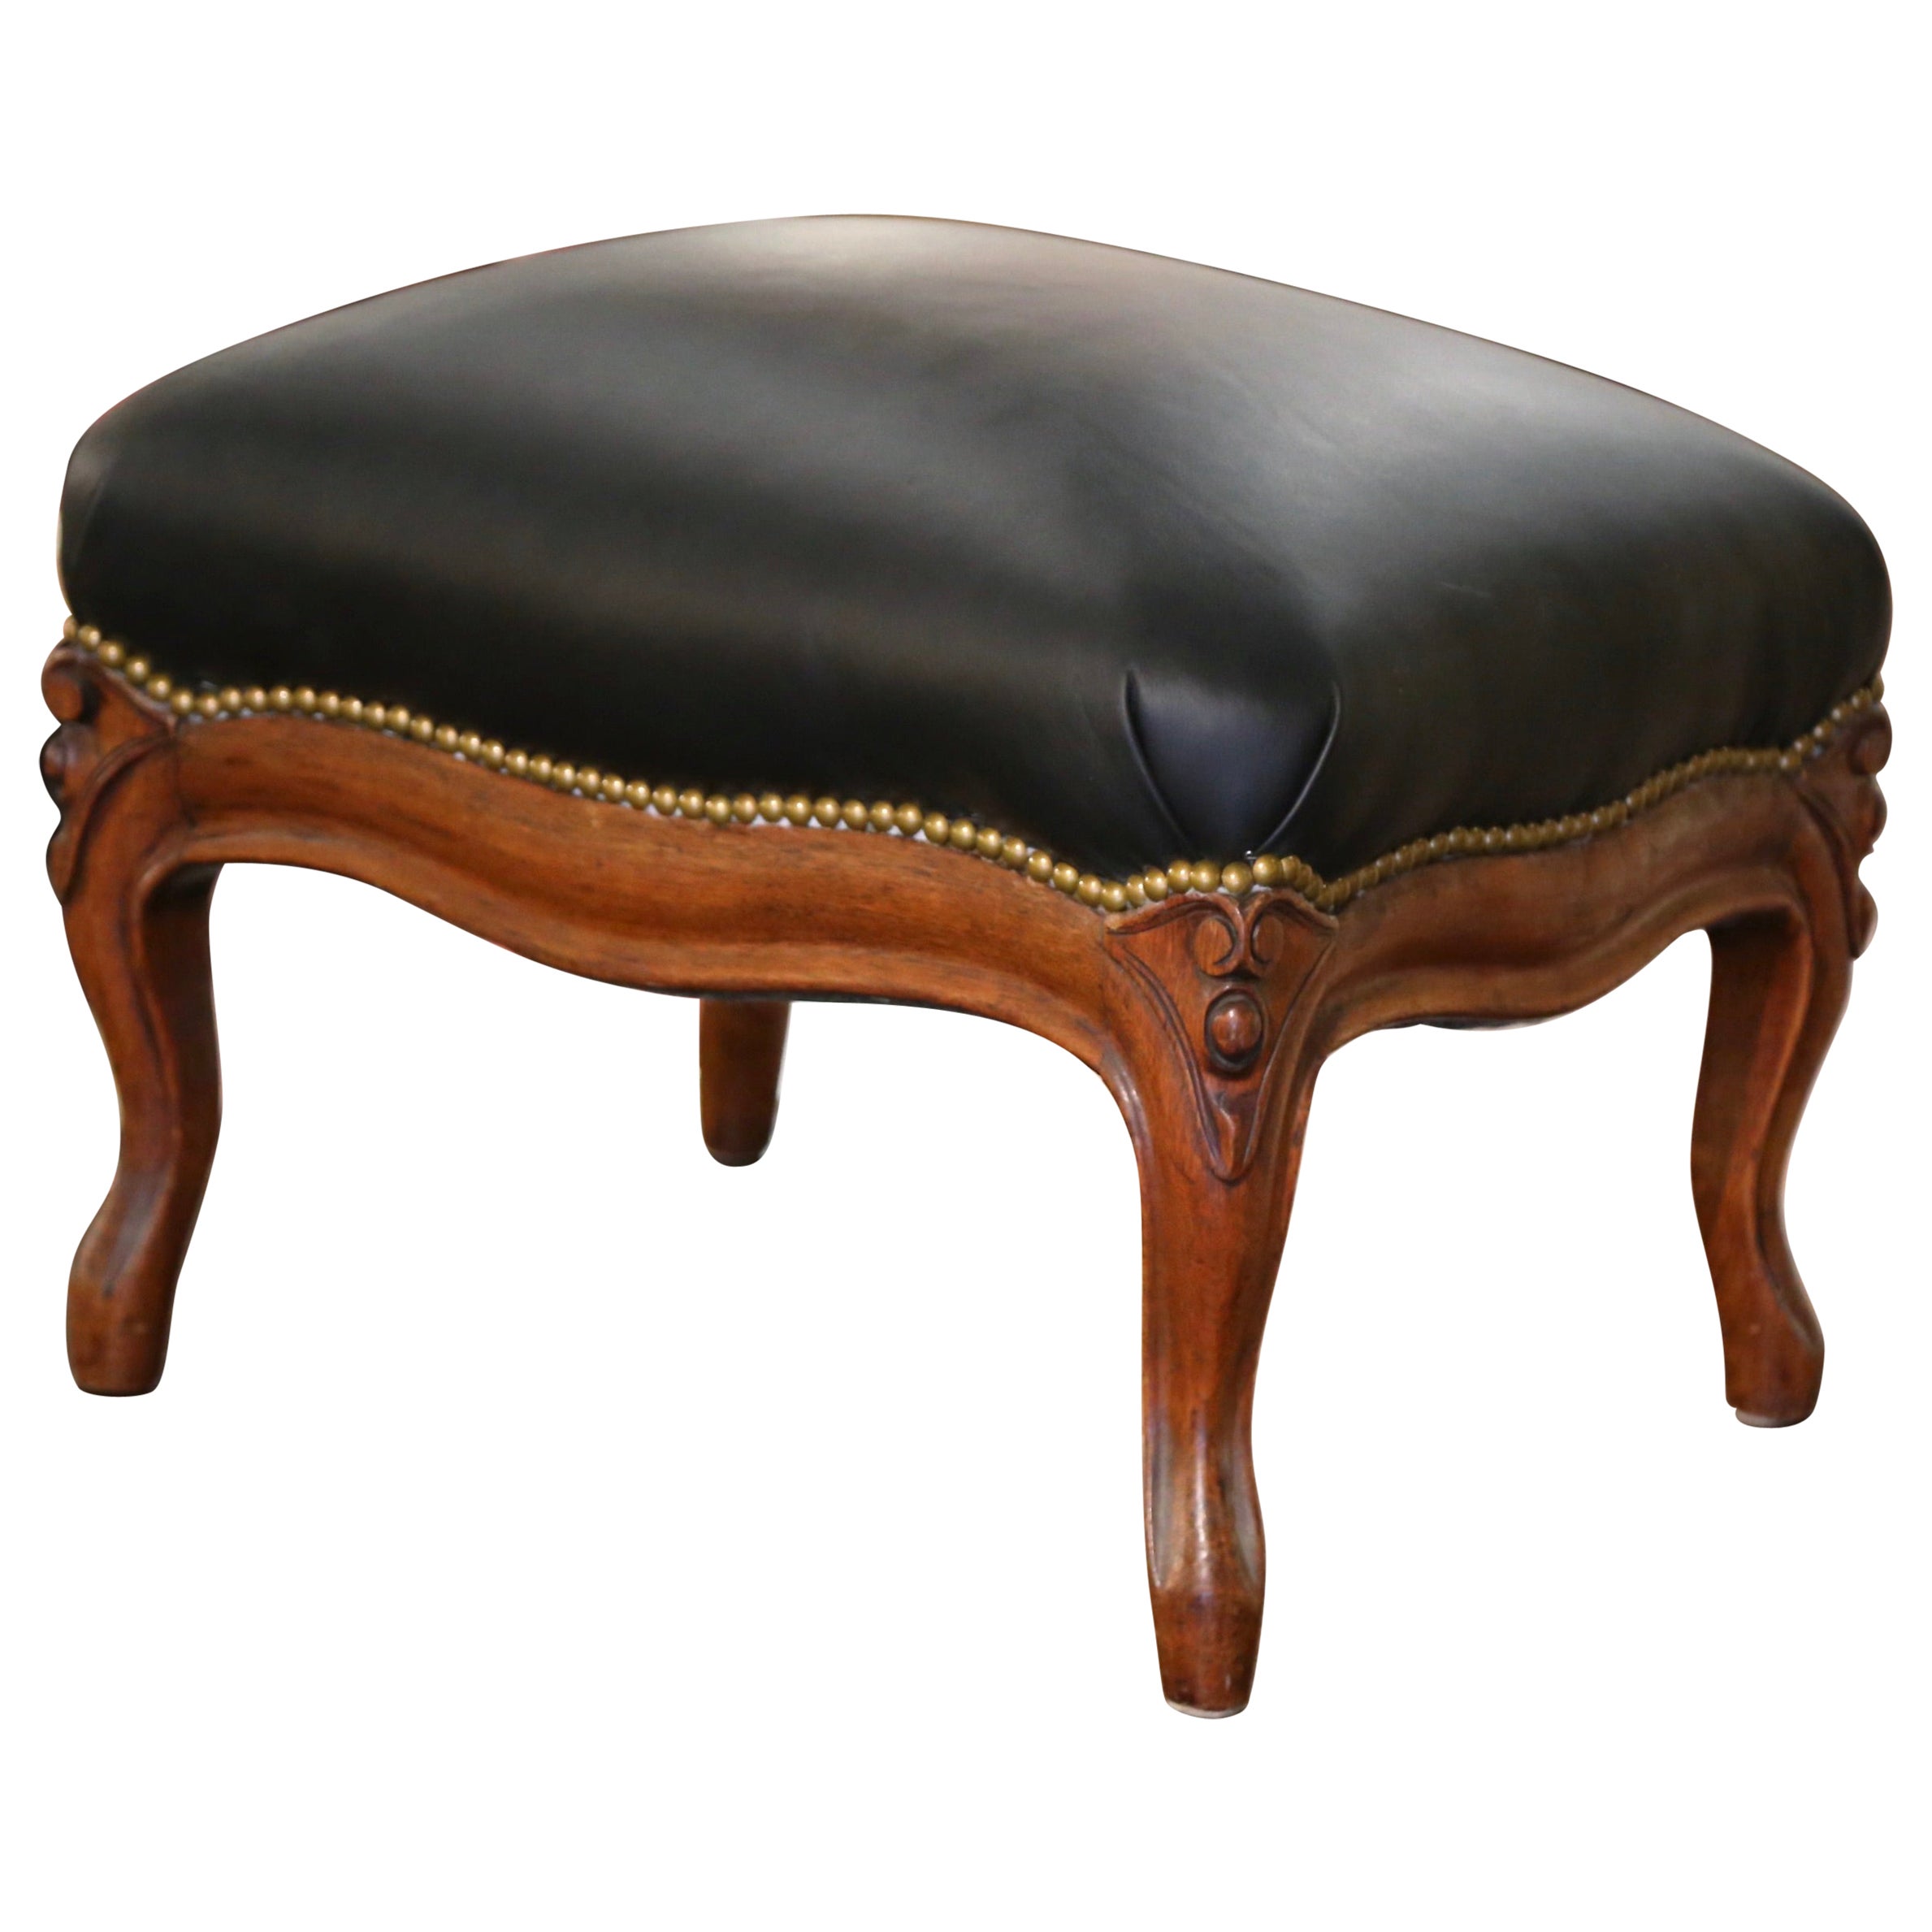 Early 20th Century French Louis XV Carved Oak Stool with Black Leather